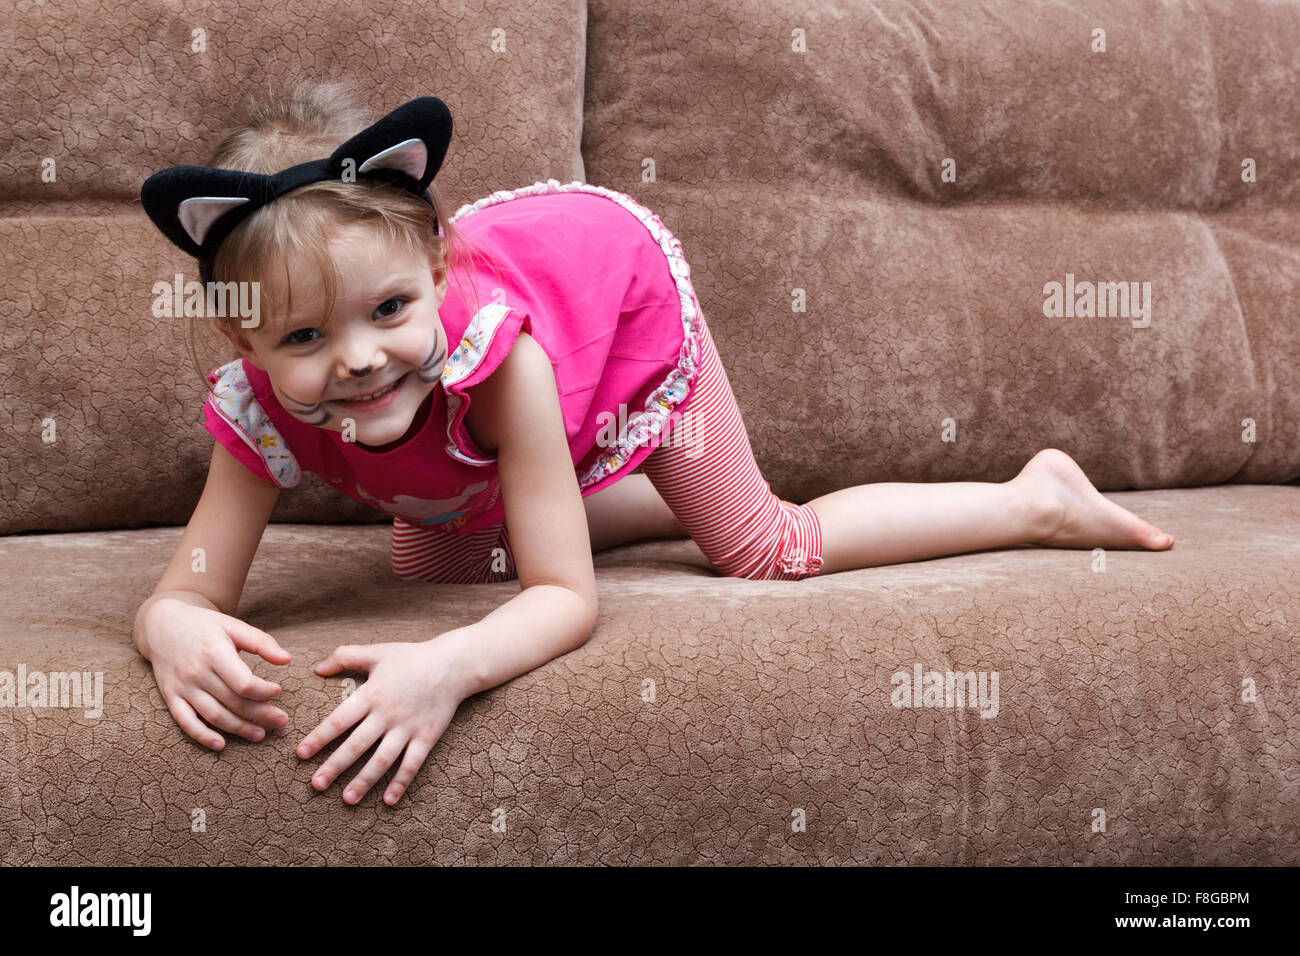 Little girl with cat face painting on a couch Banque D'Images